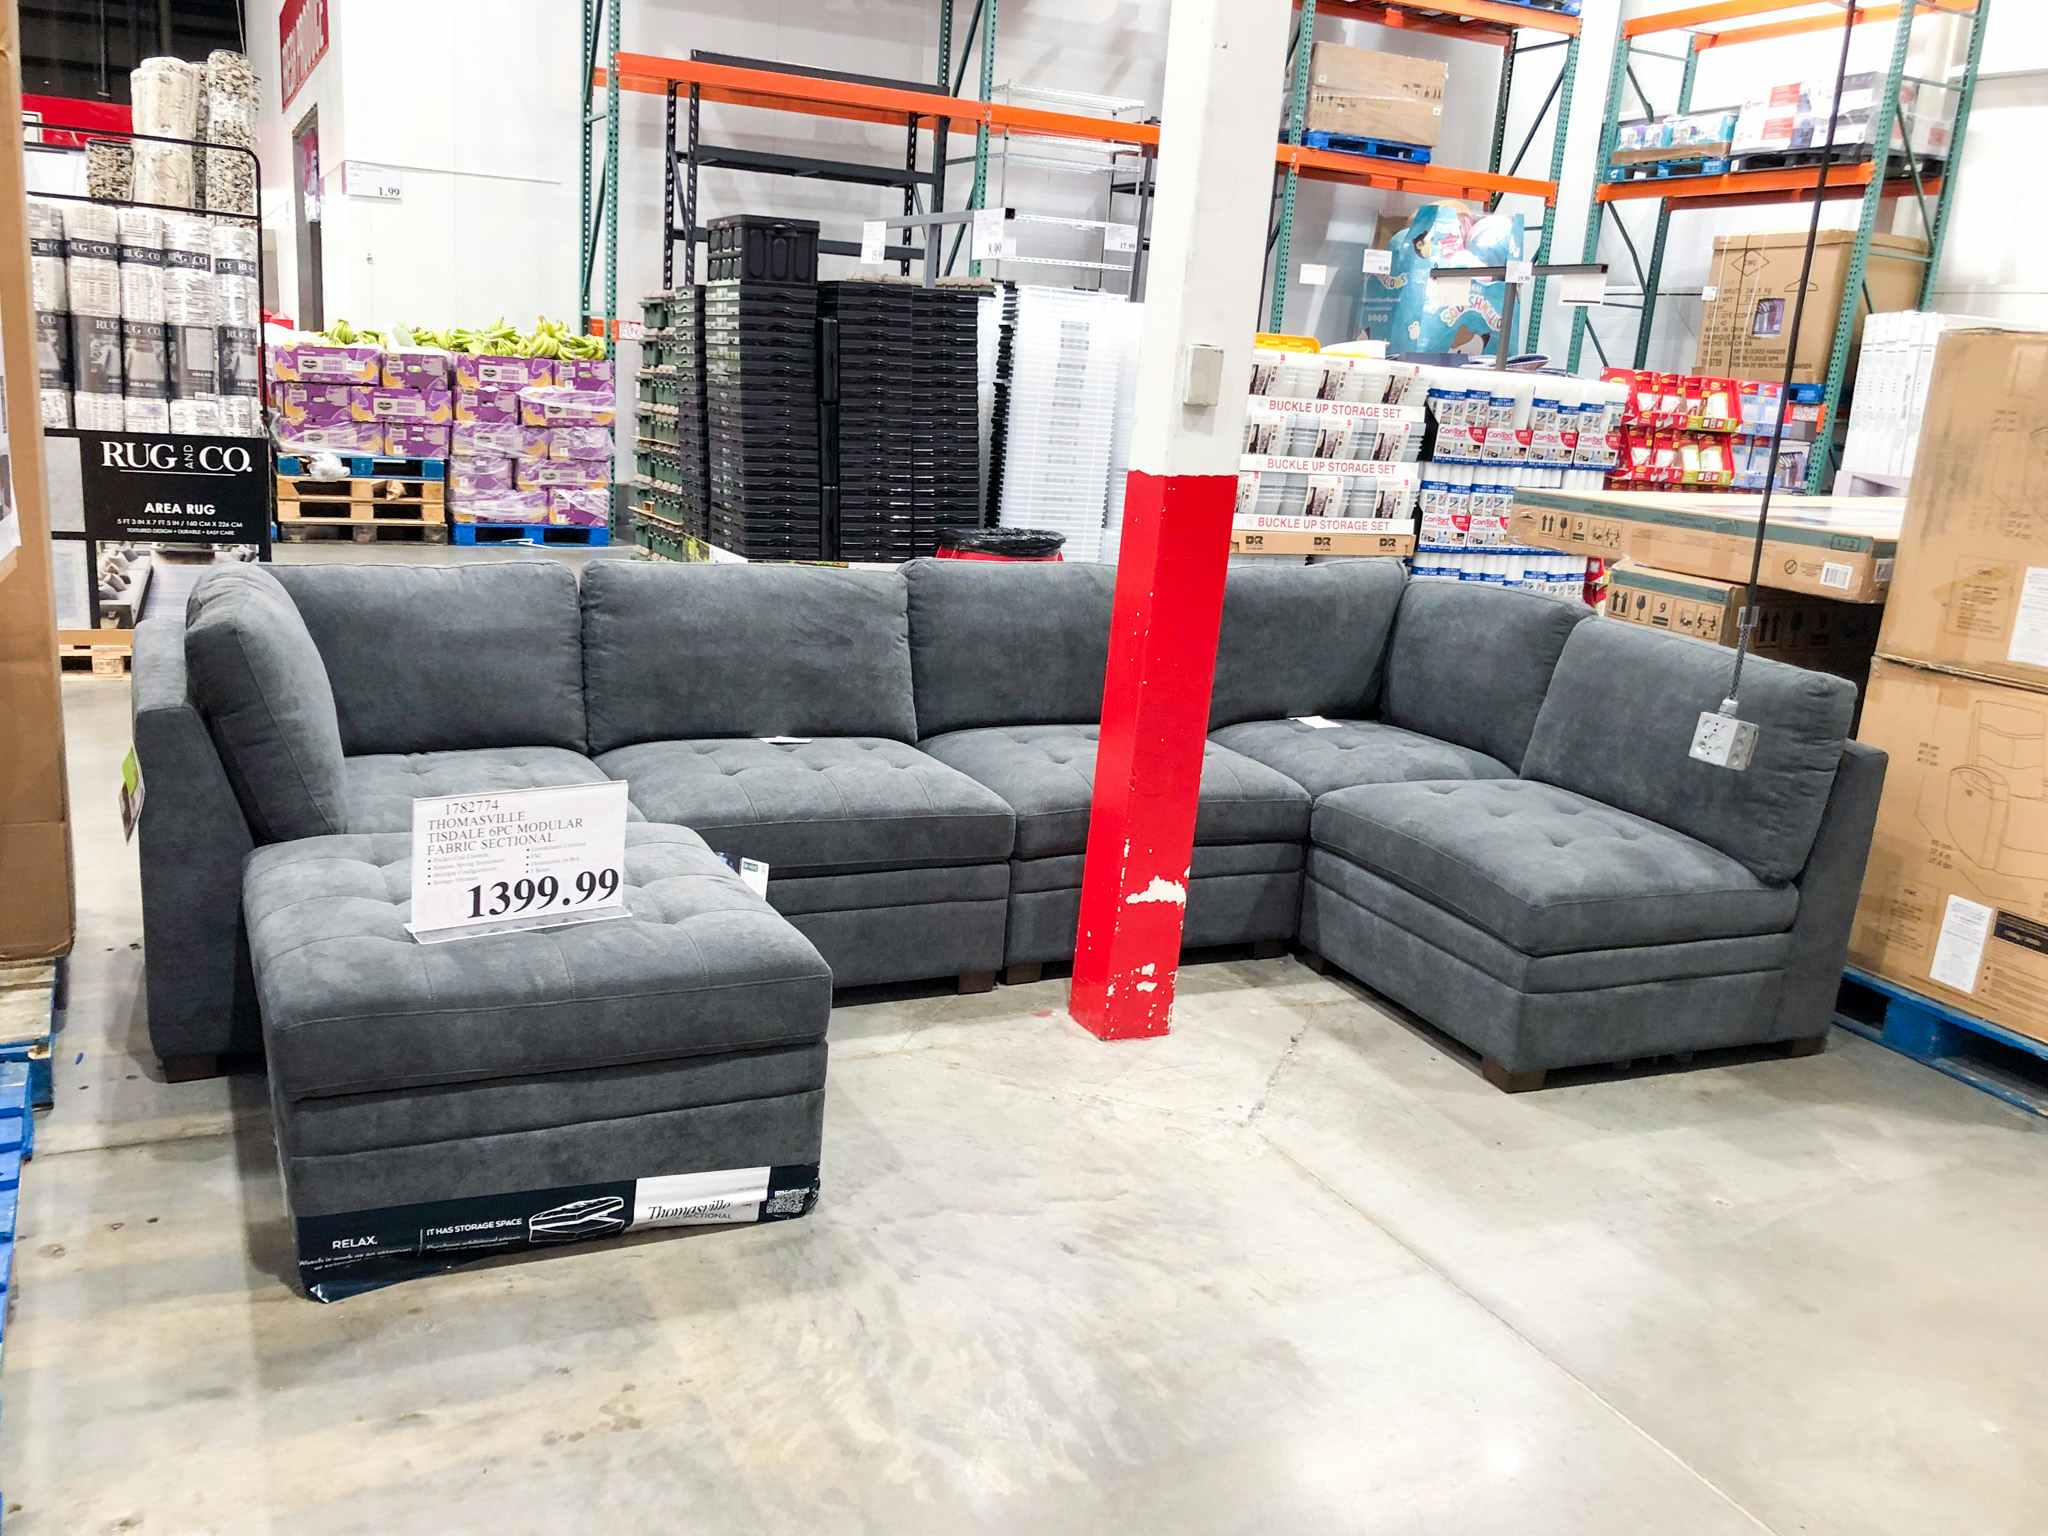 costco thomasville tisdale fabric modular sectional with storage ottoman